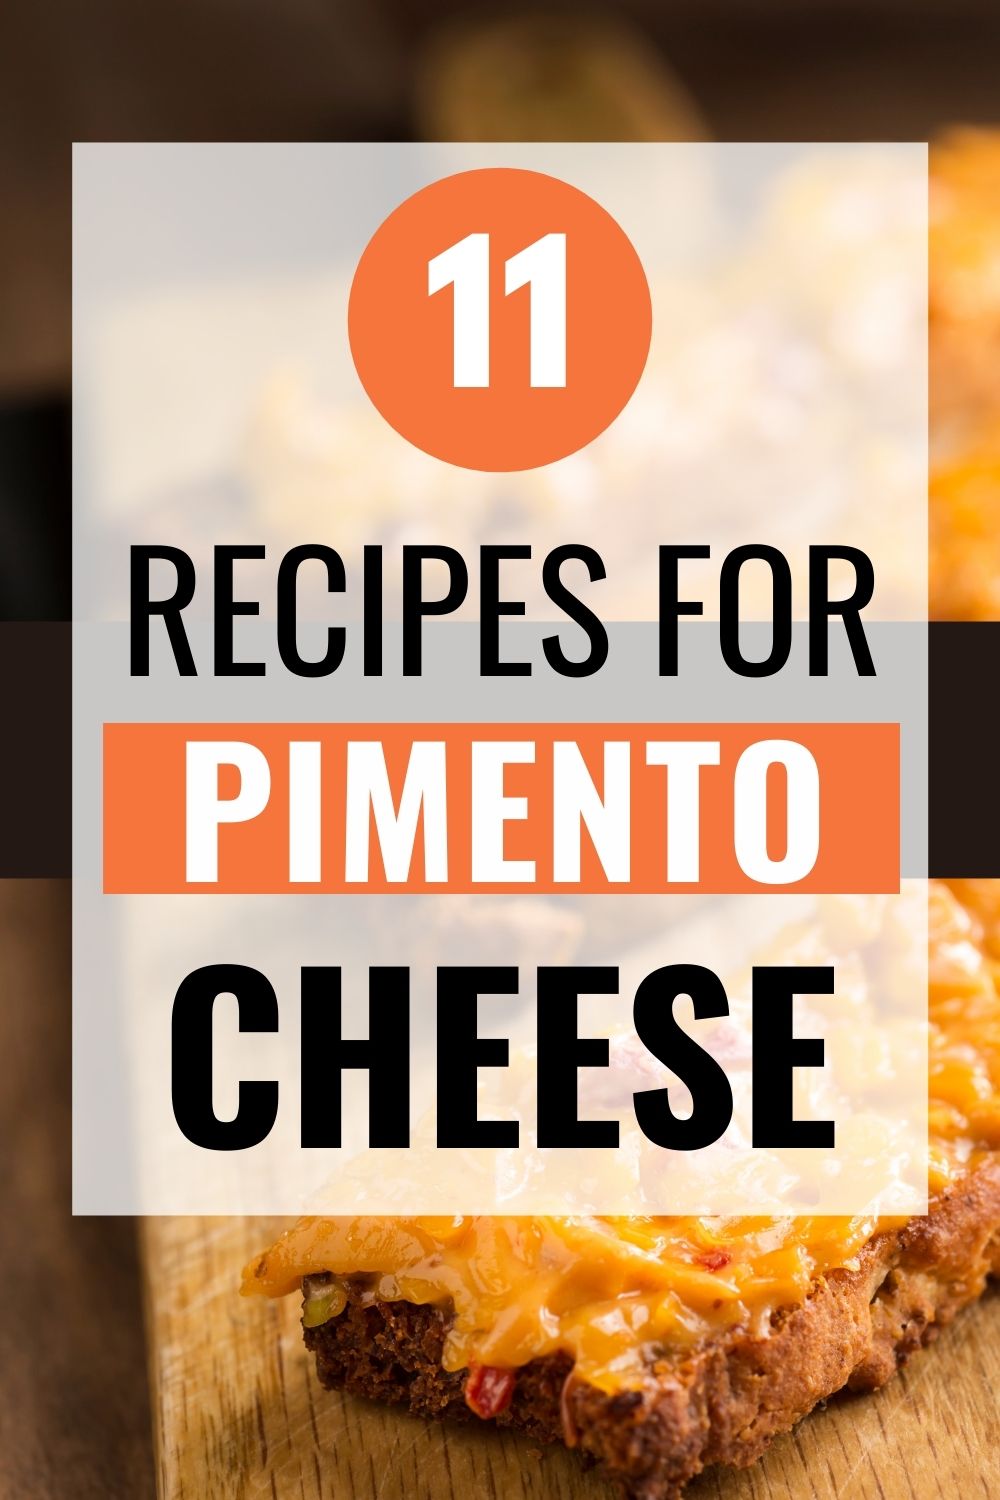 These recipes for pimento cheese are for the cheese lovers out there! You can have it spicy or not, or make it vegan, keto, or dairy-free.